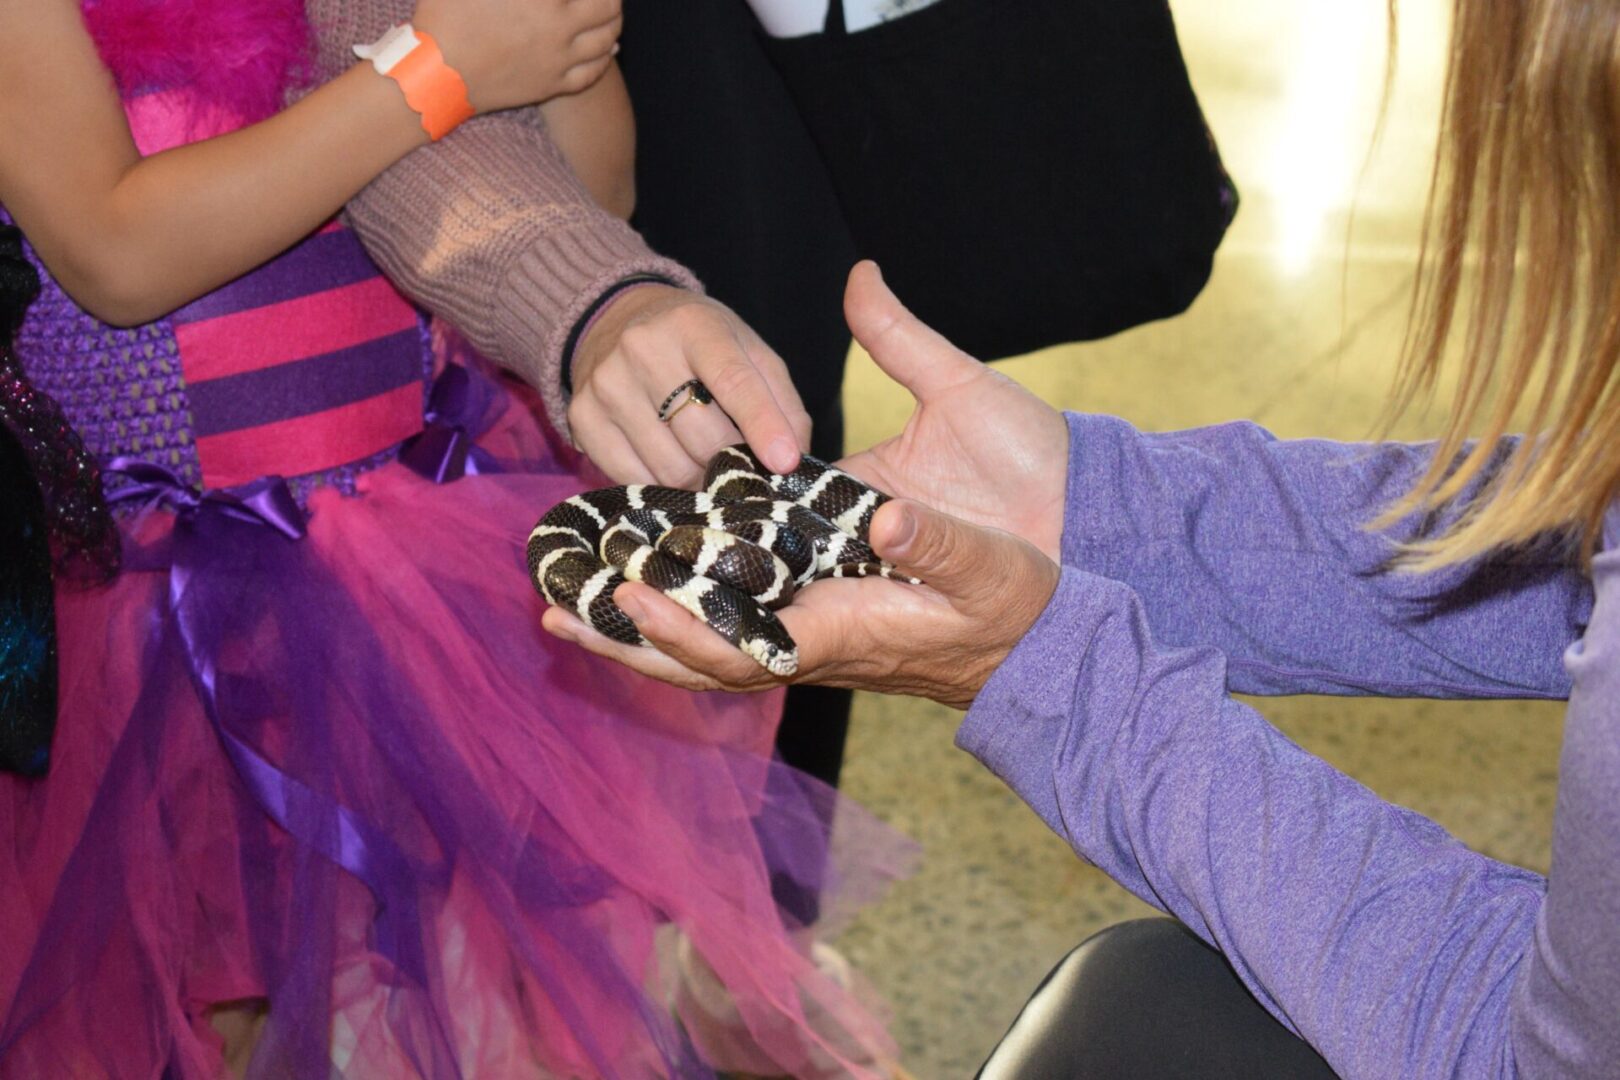 A girl in a purple dress is holding a snake.